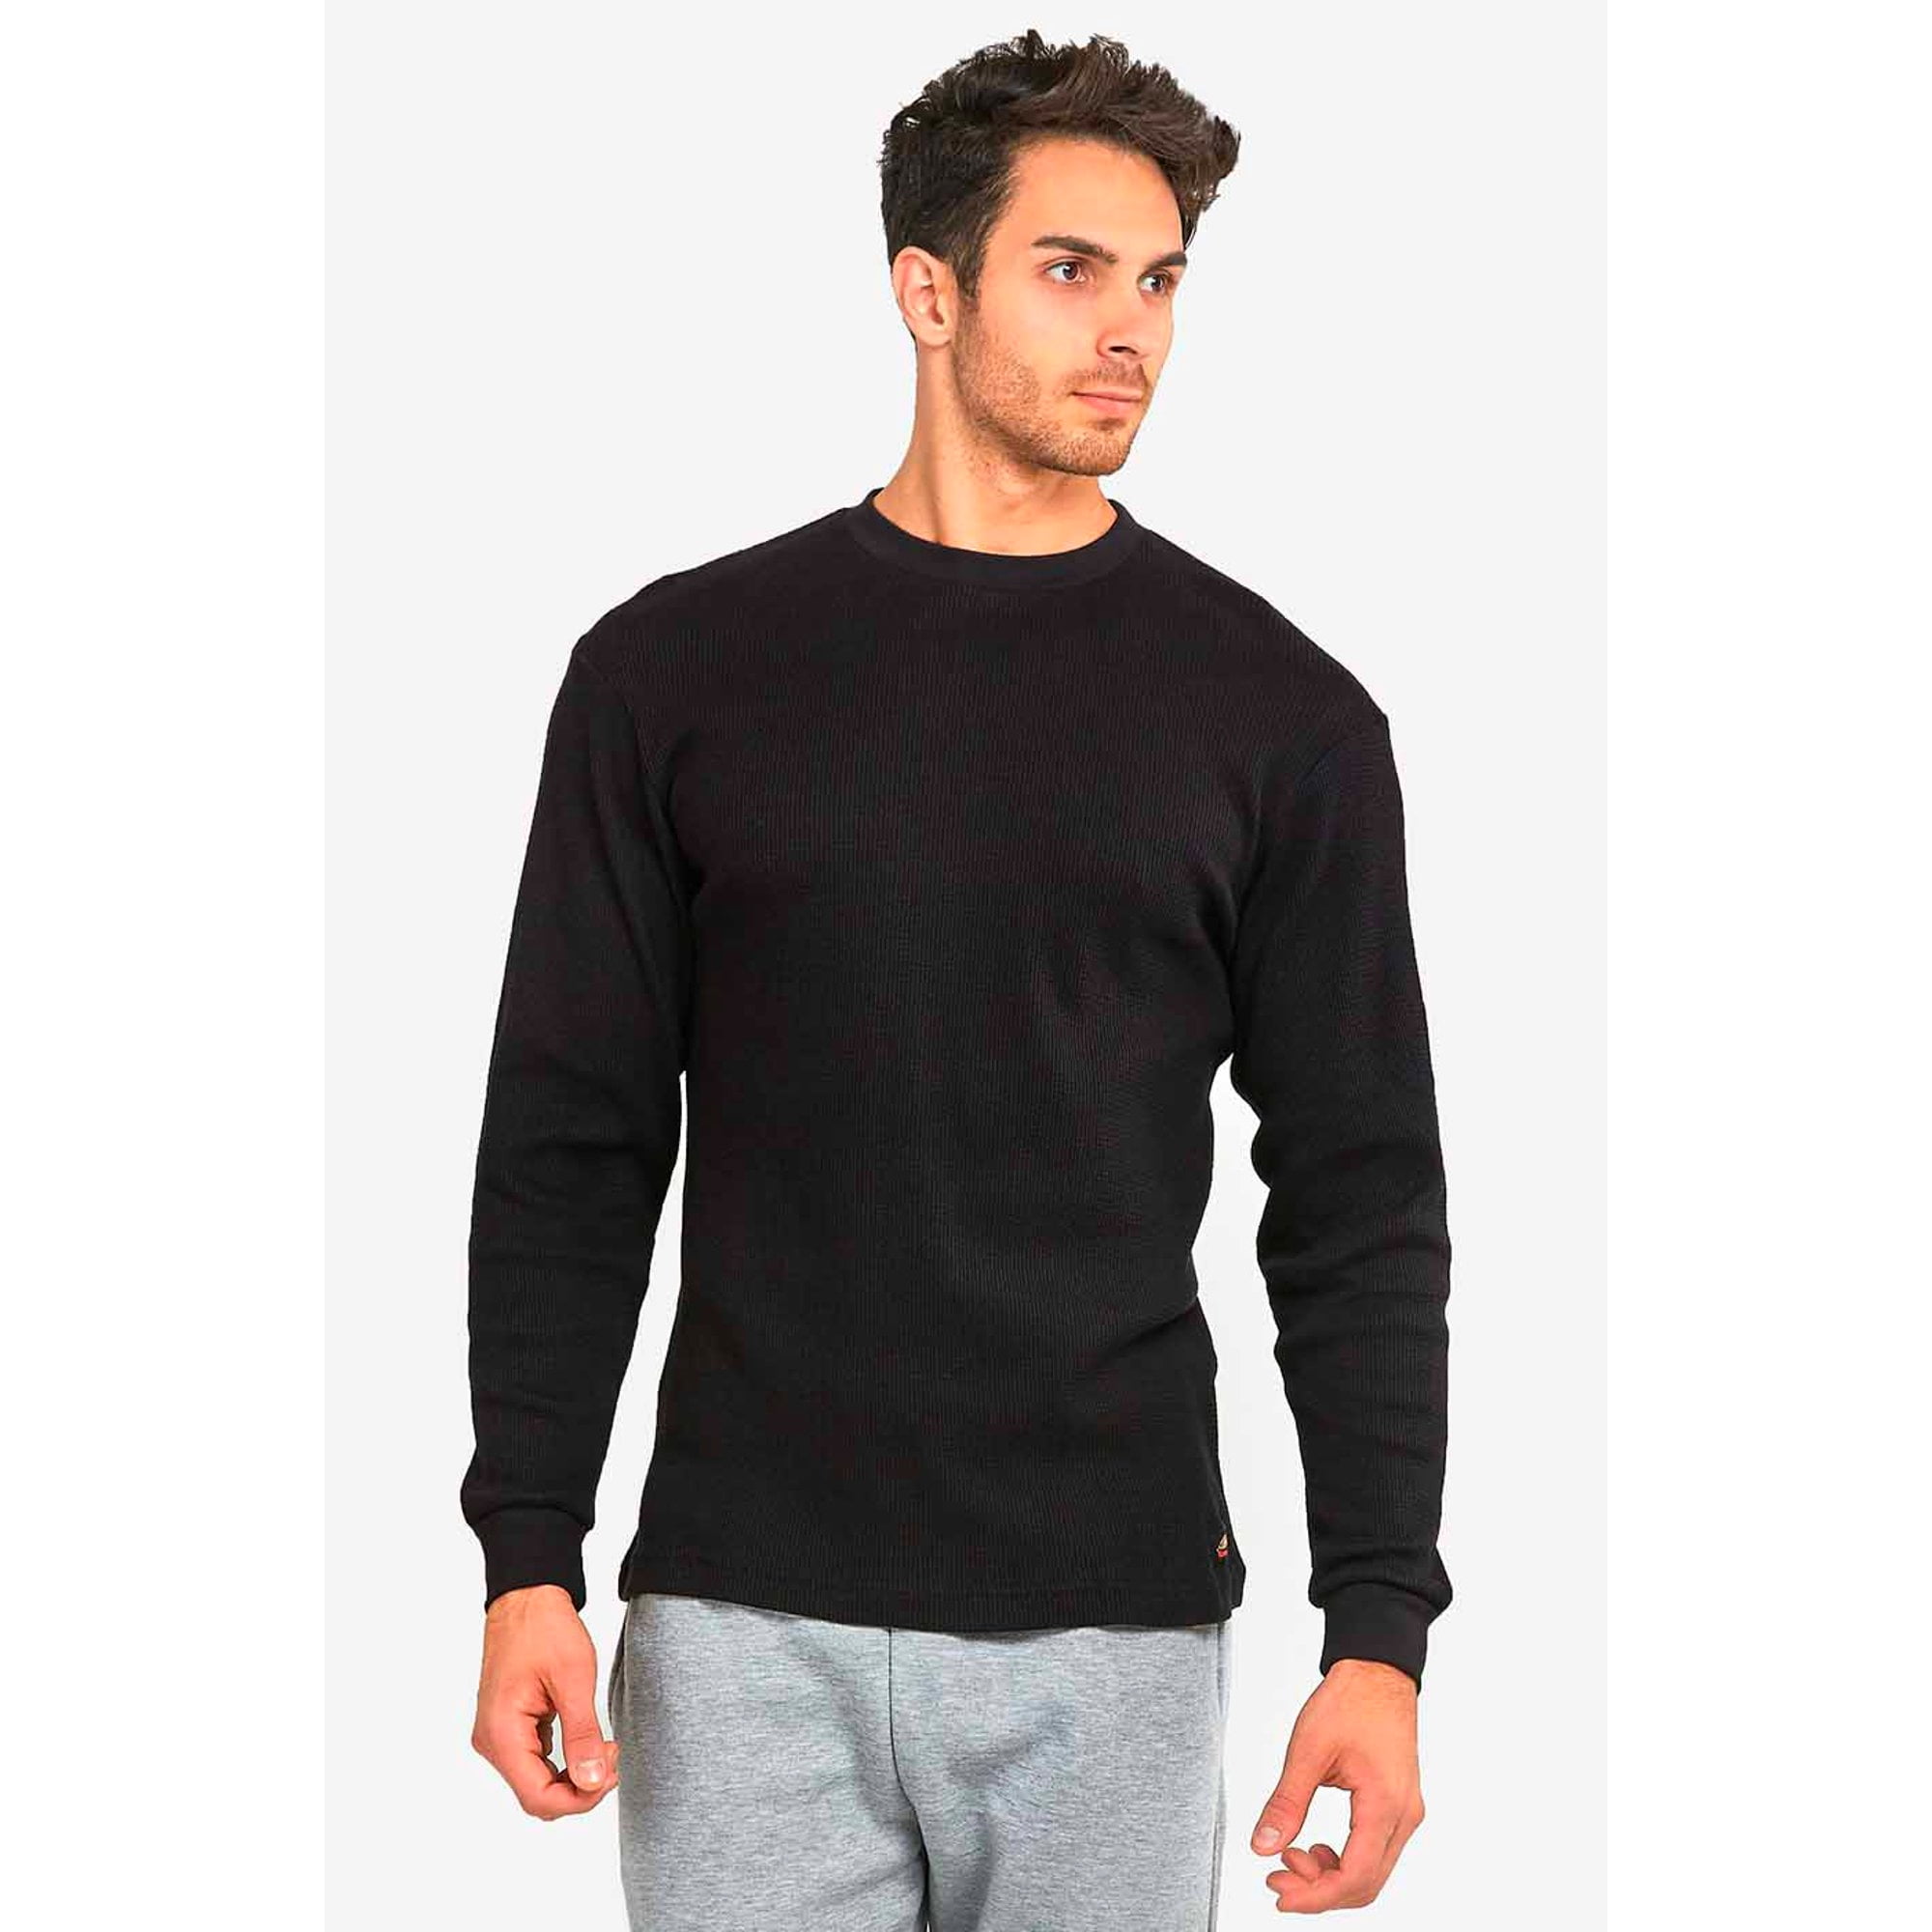 SLM Men’s 100% Cotton Thermal Top Waffle Knit Henley Undershirt ...